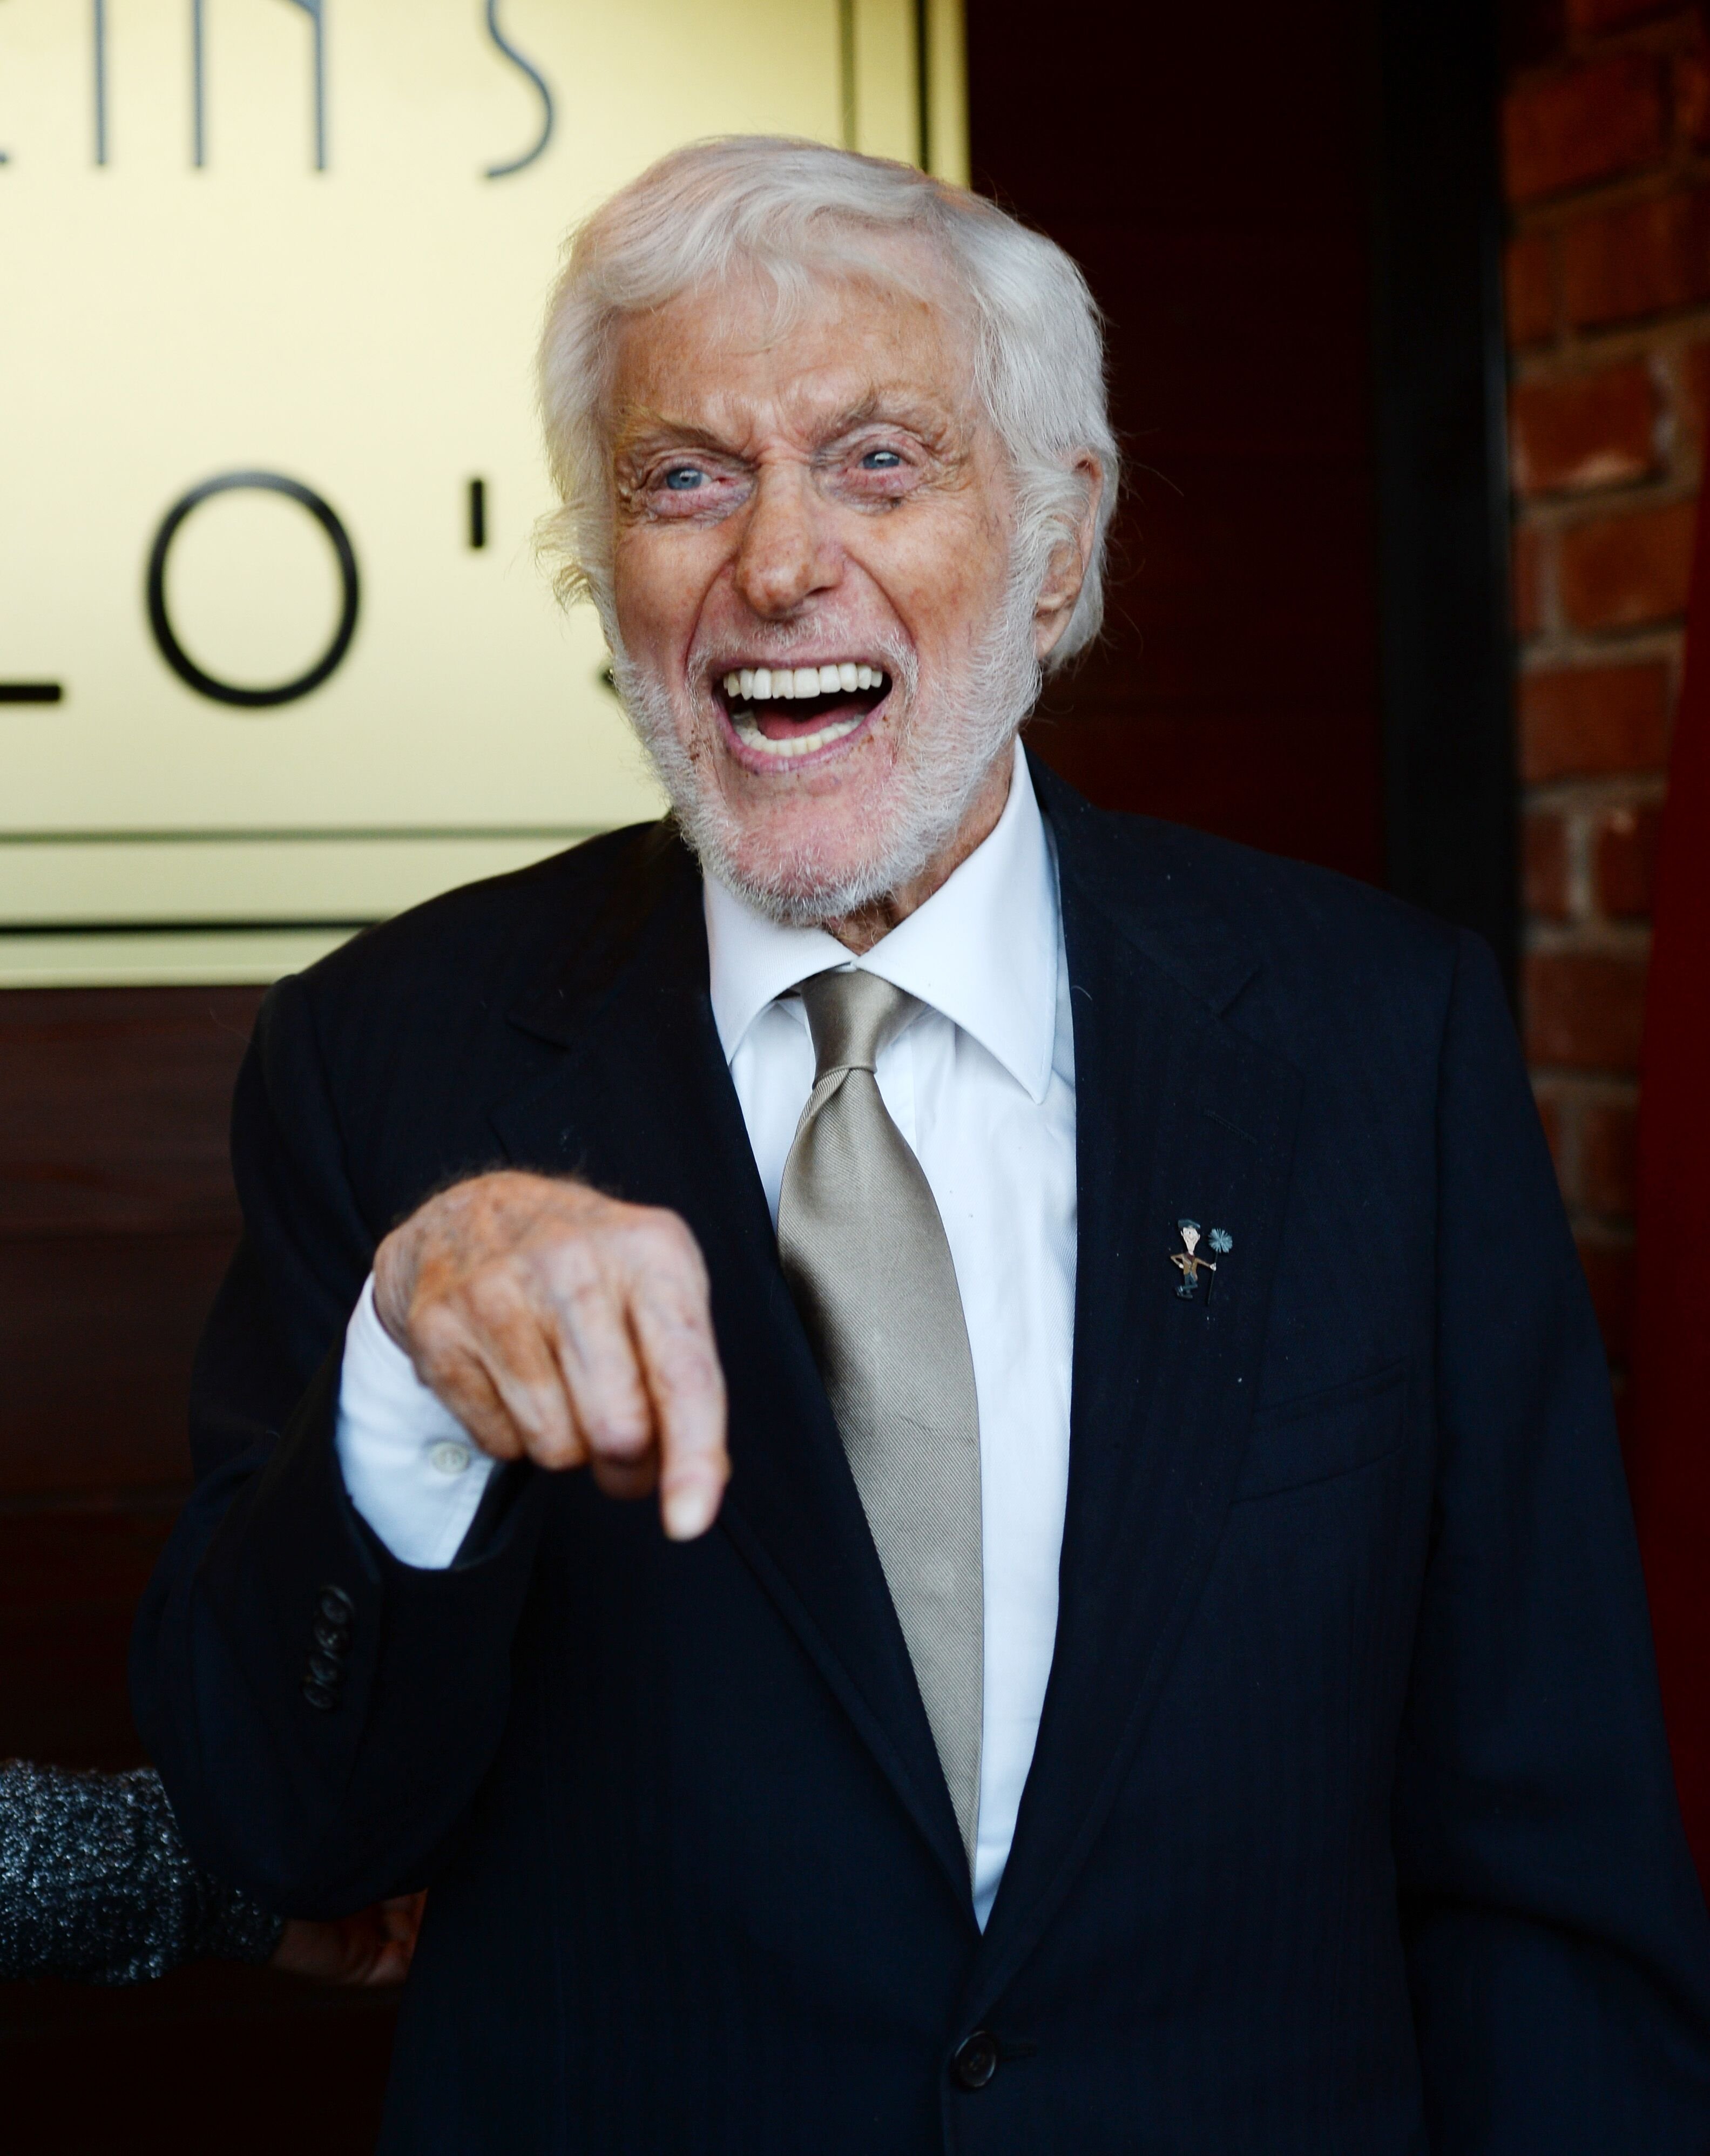 Actor Dick Van Dyke arrives at the debut of the Southern California location of Michael Feinstein's new supper club Feinstein's at Vitello's  | Getty Images